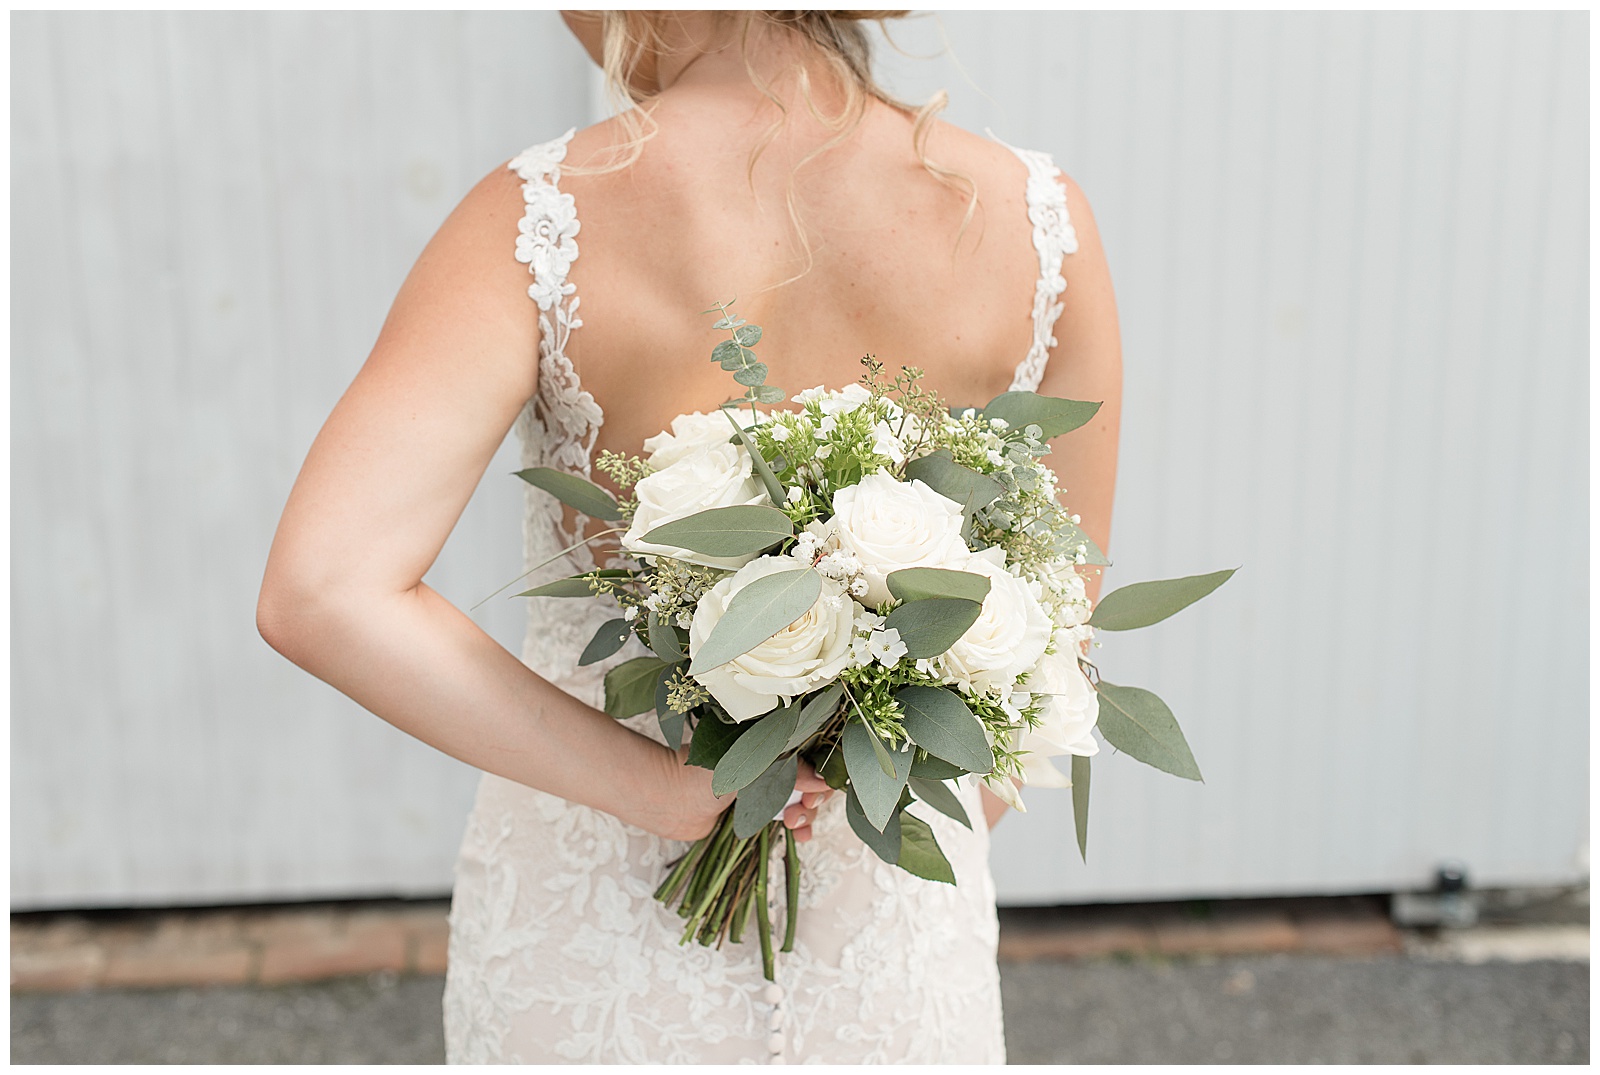 bride's back to camera holding bouquet behind her back with variety of white flowers and eucalyptus by white barn door